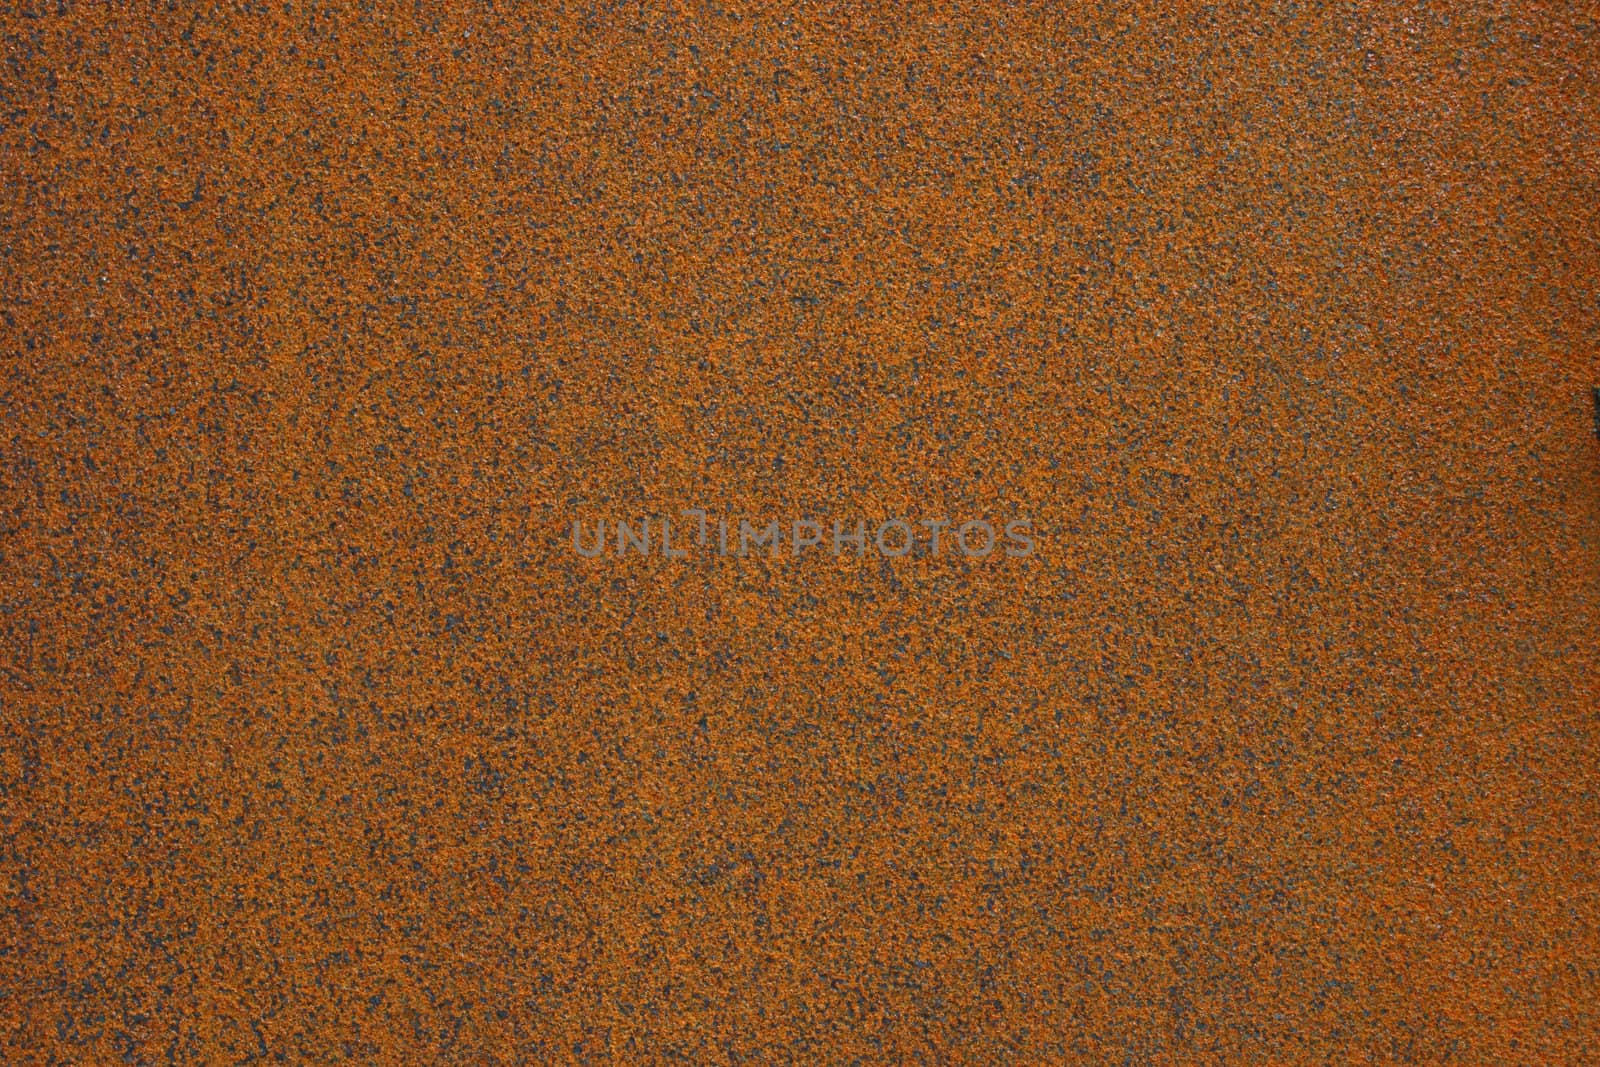 Texture of grunge metal wall background